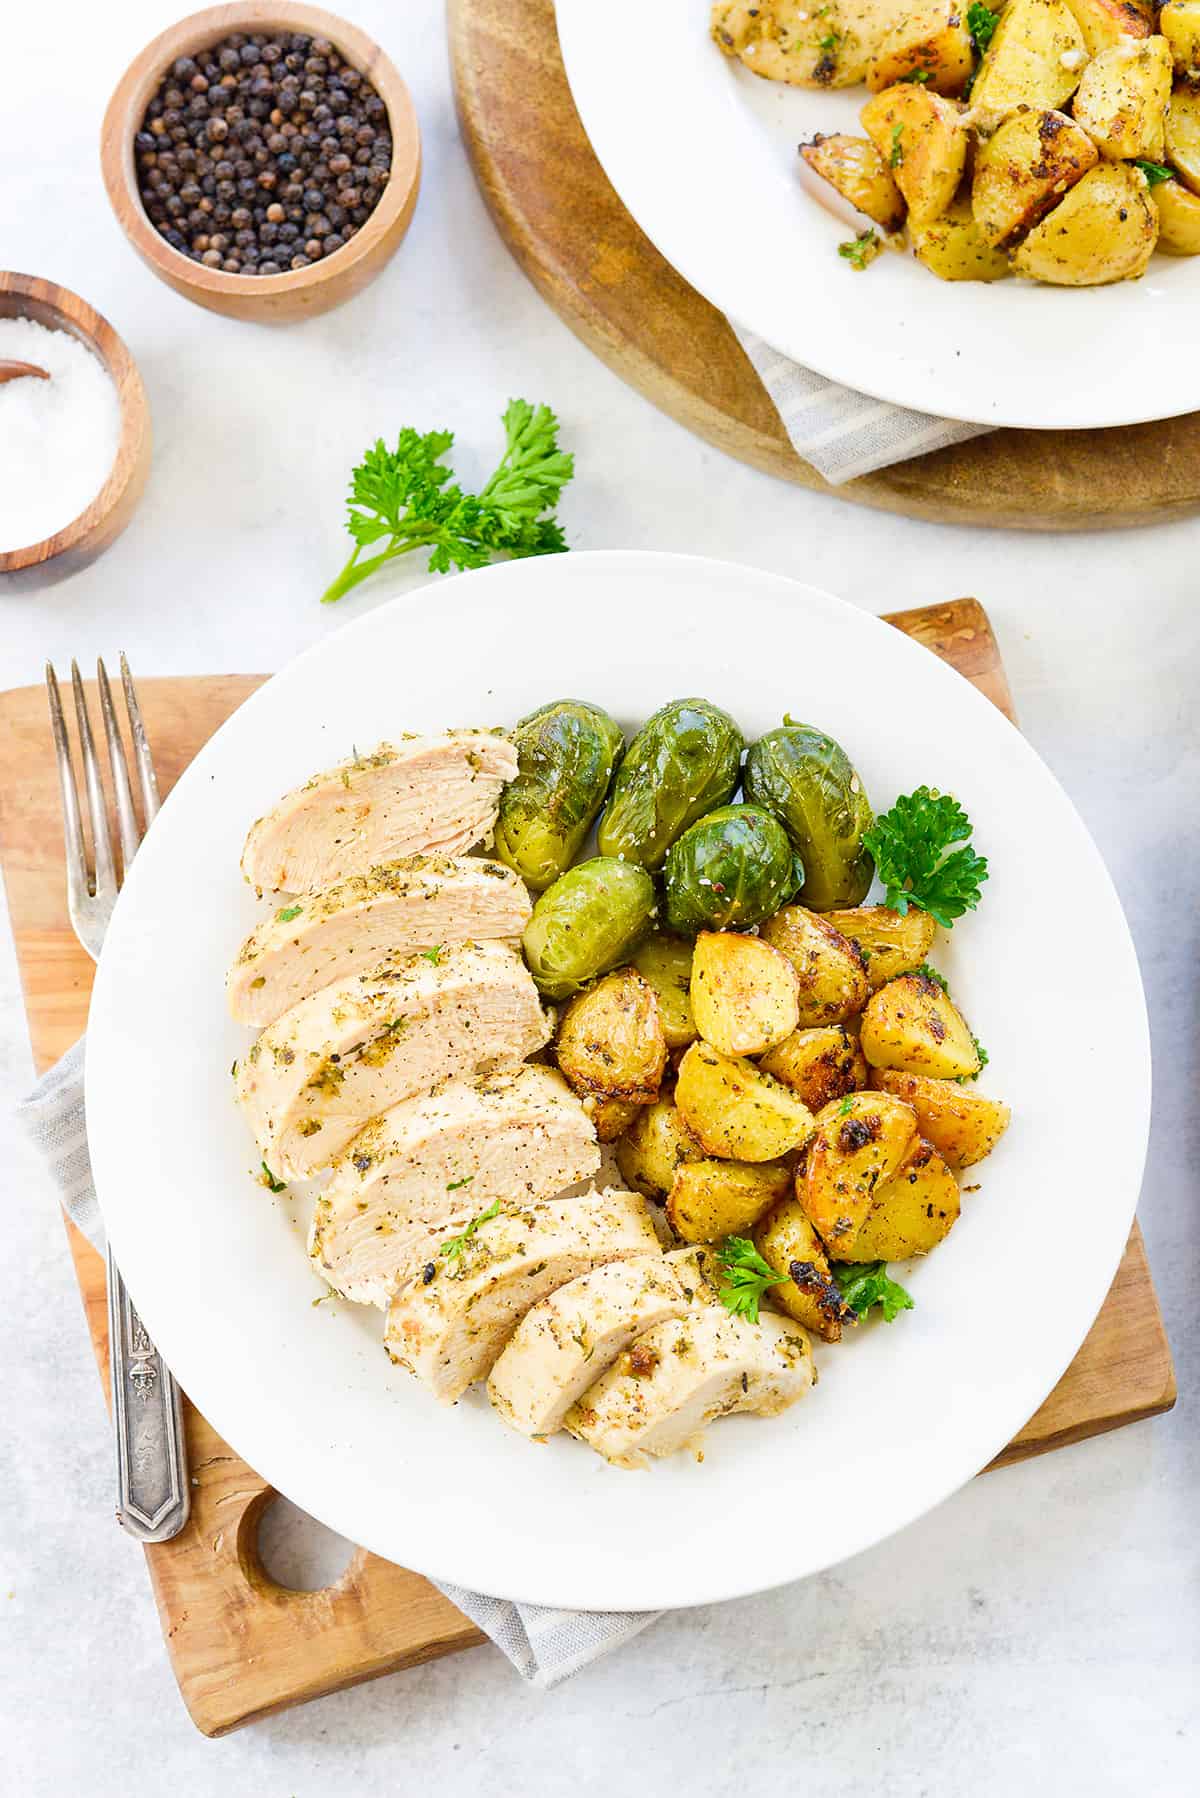 plate of sliced chicken, potatoes, and Brussels sprouts.